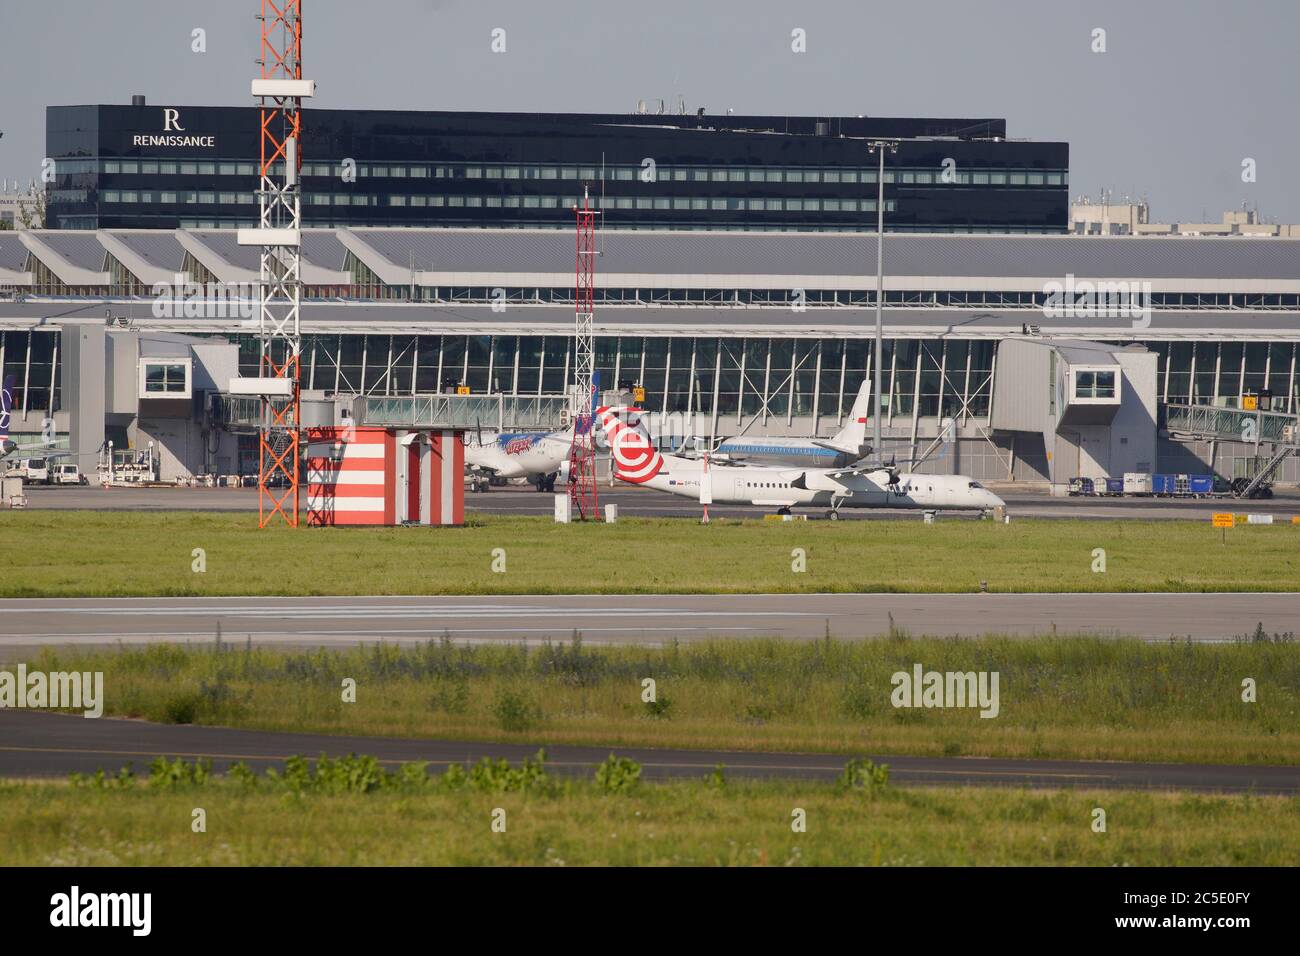 A LOT domestic airliner is seen on the apron at Chopin Airport on July 1, 2020 in Warsaw, Poland. Poland has extended the list of flights to 8 non-EU Stock Photo